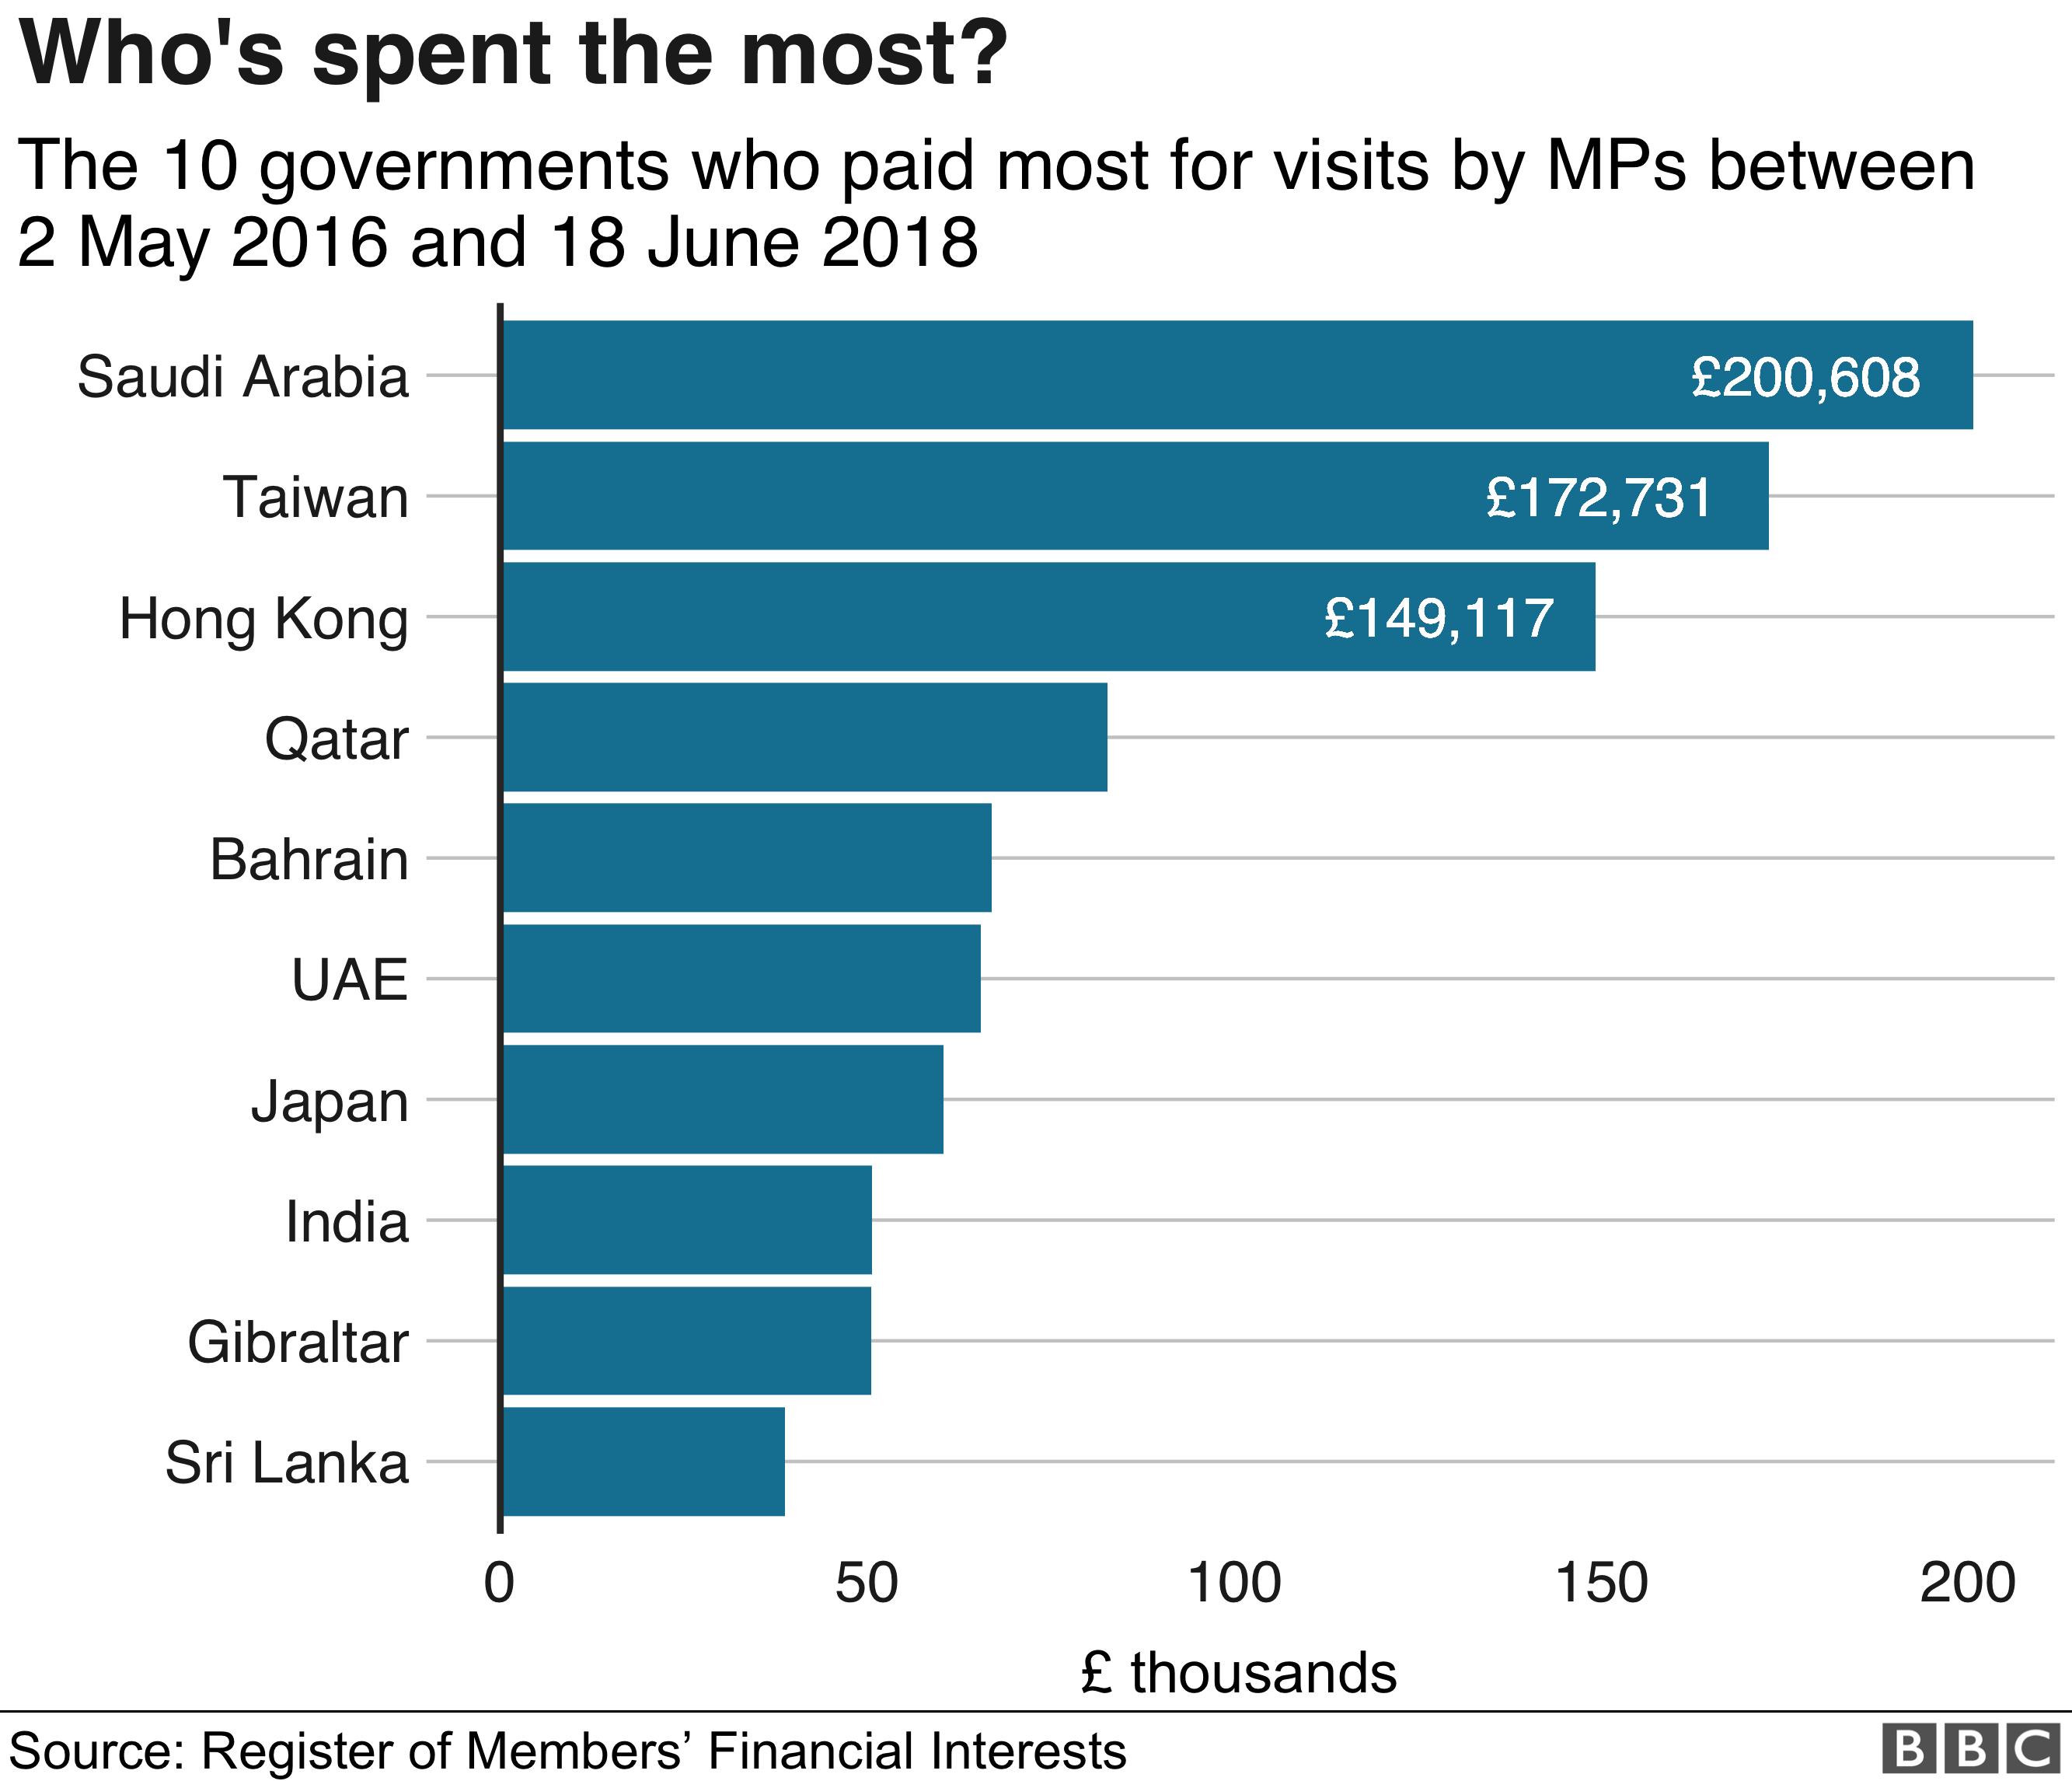 The Saudi Arabian government have spent more than £200,000 on getting British MPs to visit their country over the last two years